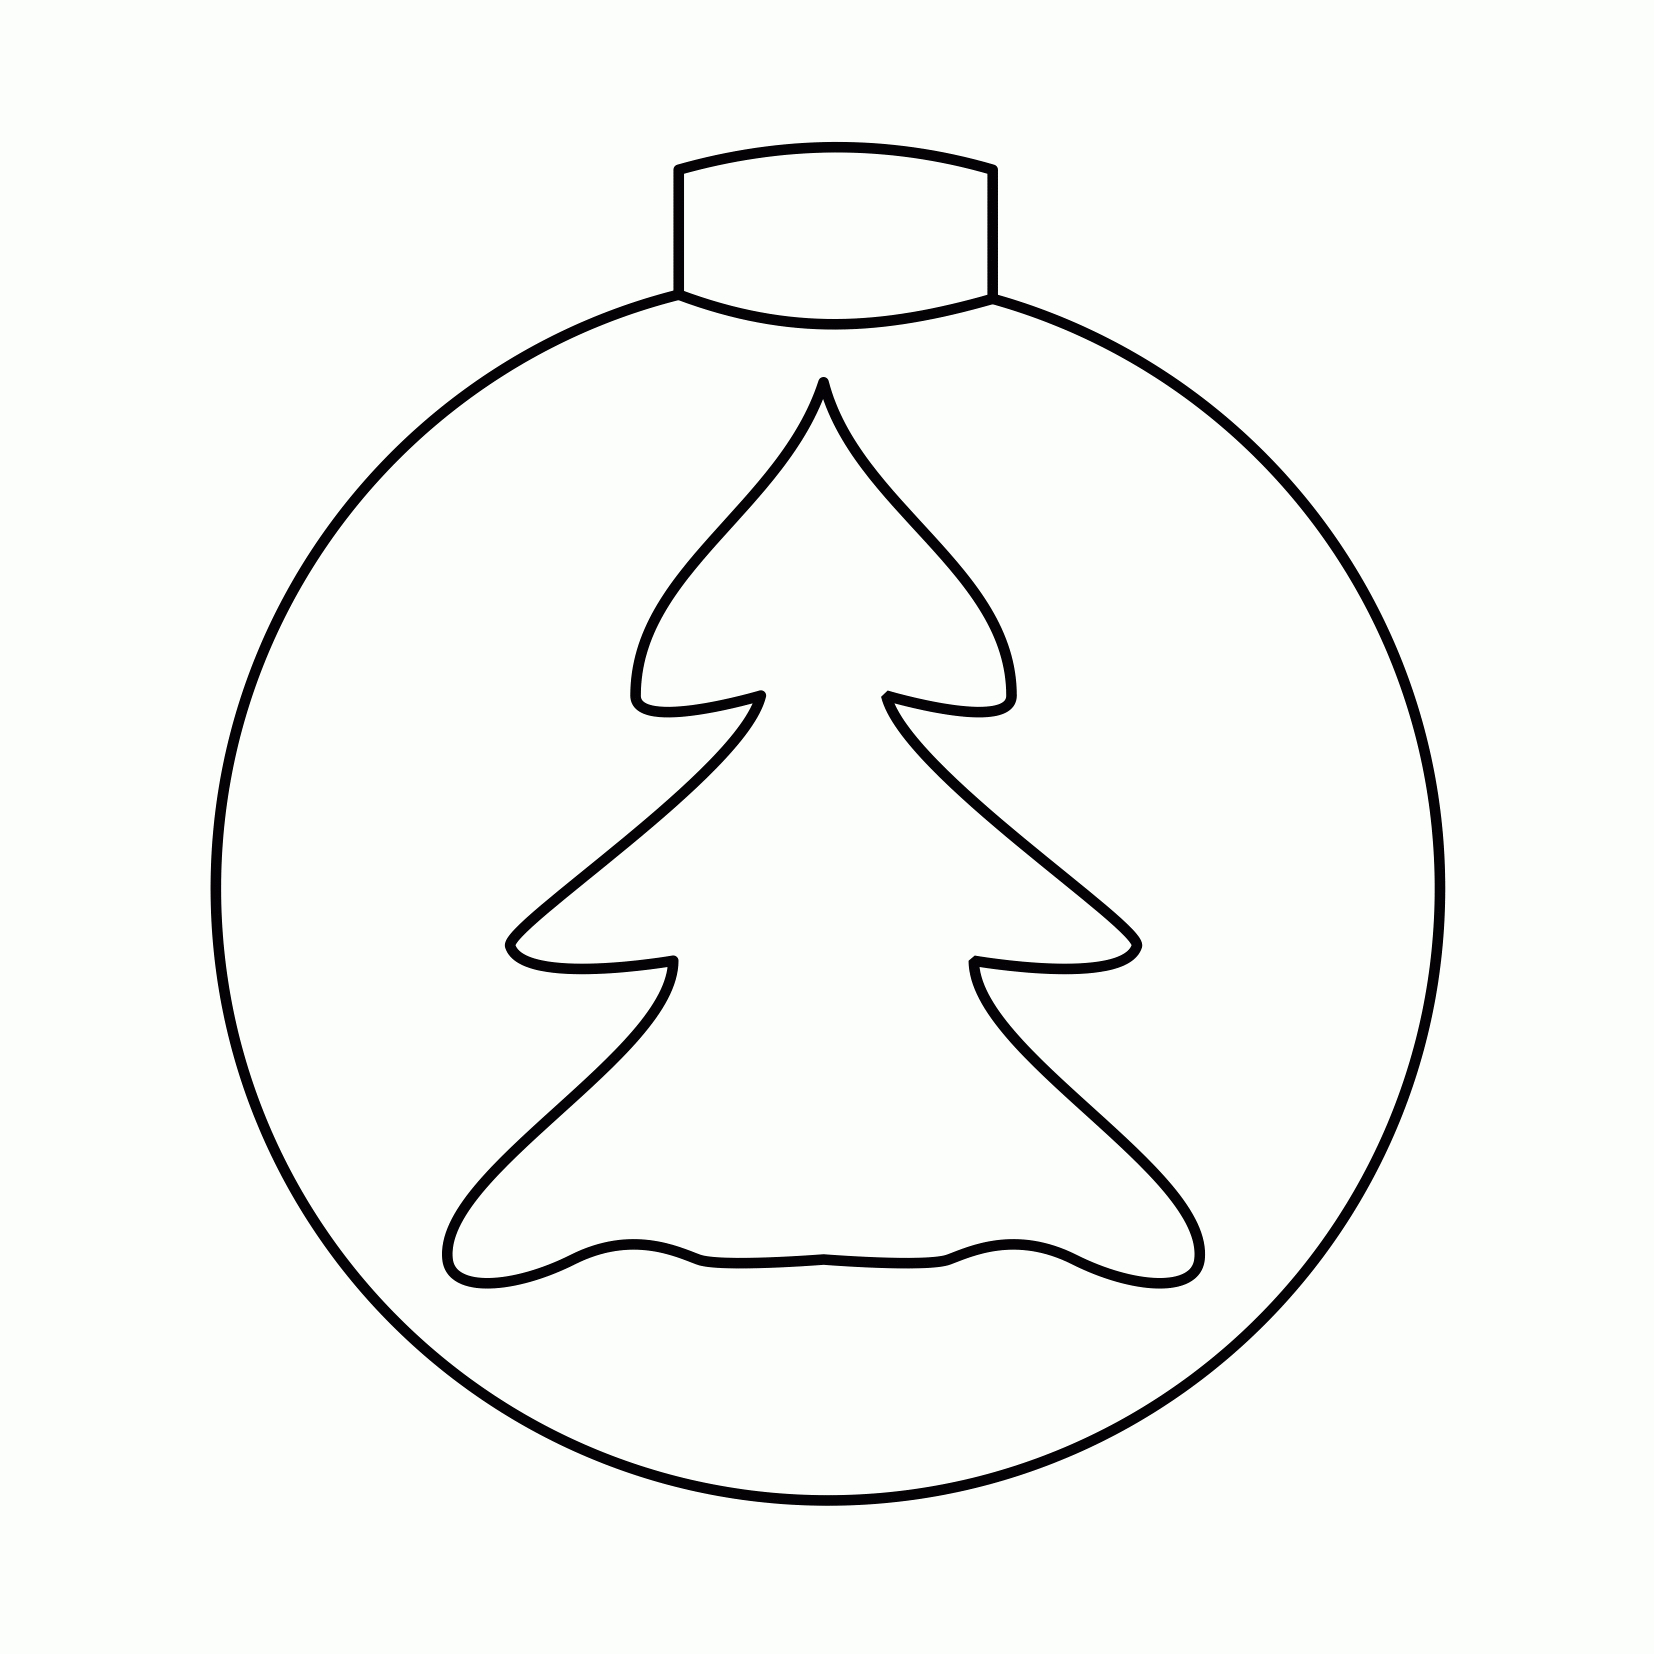 Coloring ~ Christmas Ornaments To Color Beautiful Printable Coloring - Free Printable Christmas Tree Ornaments Coloring Pages